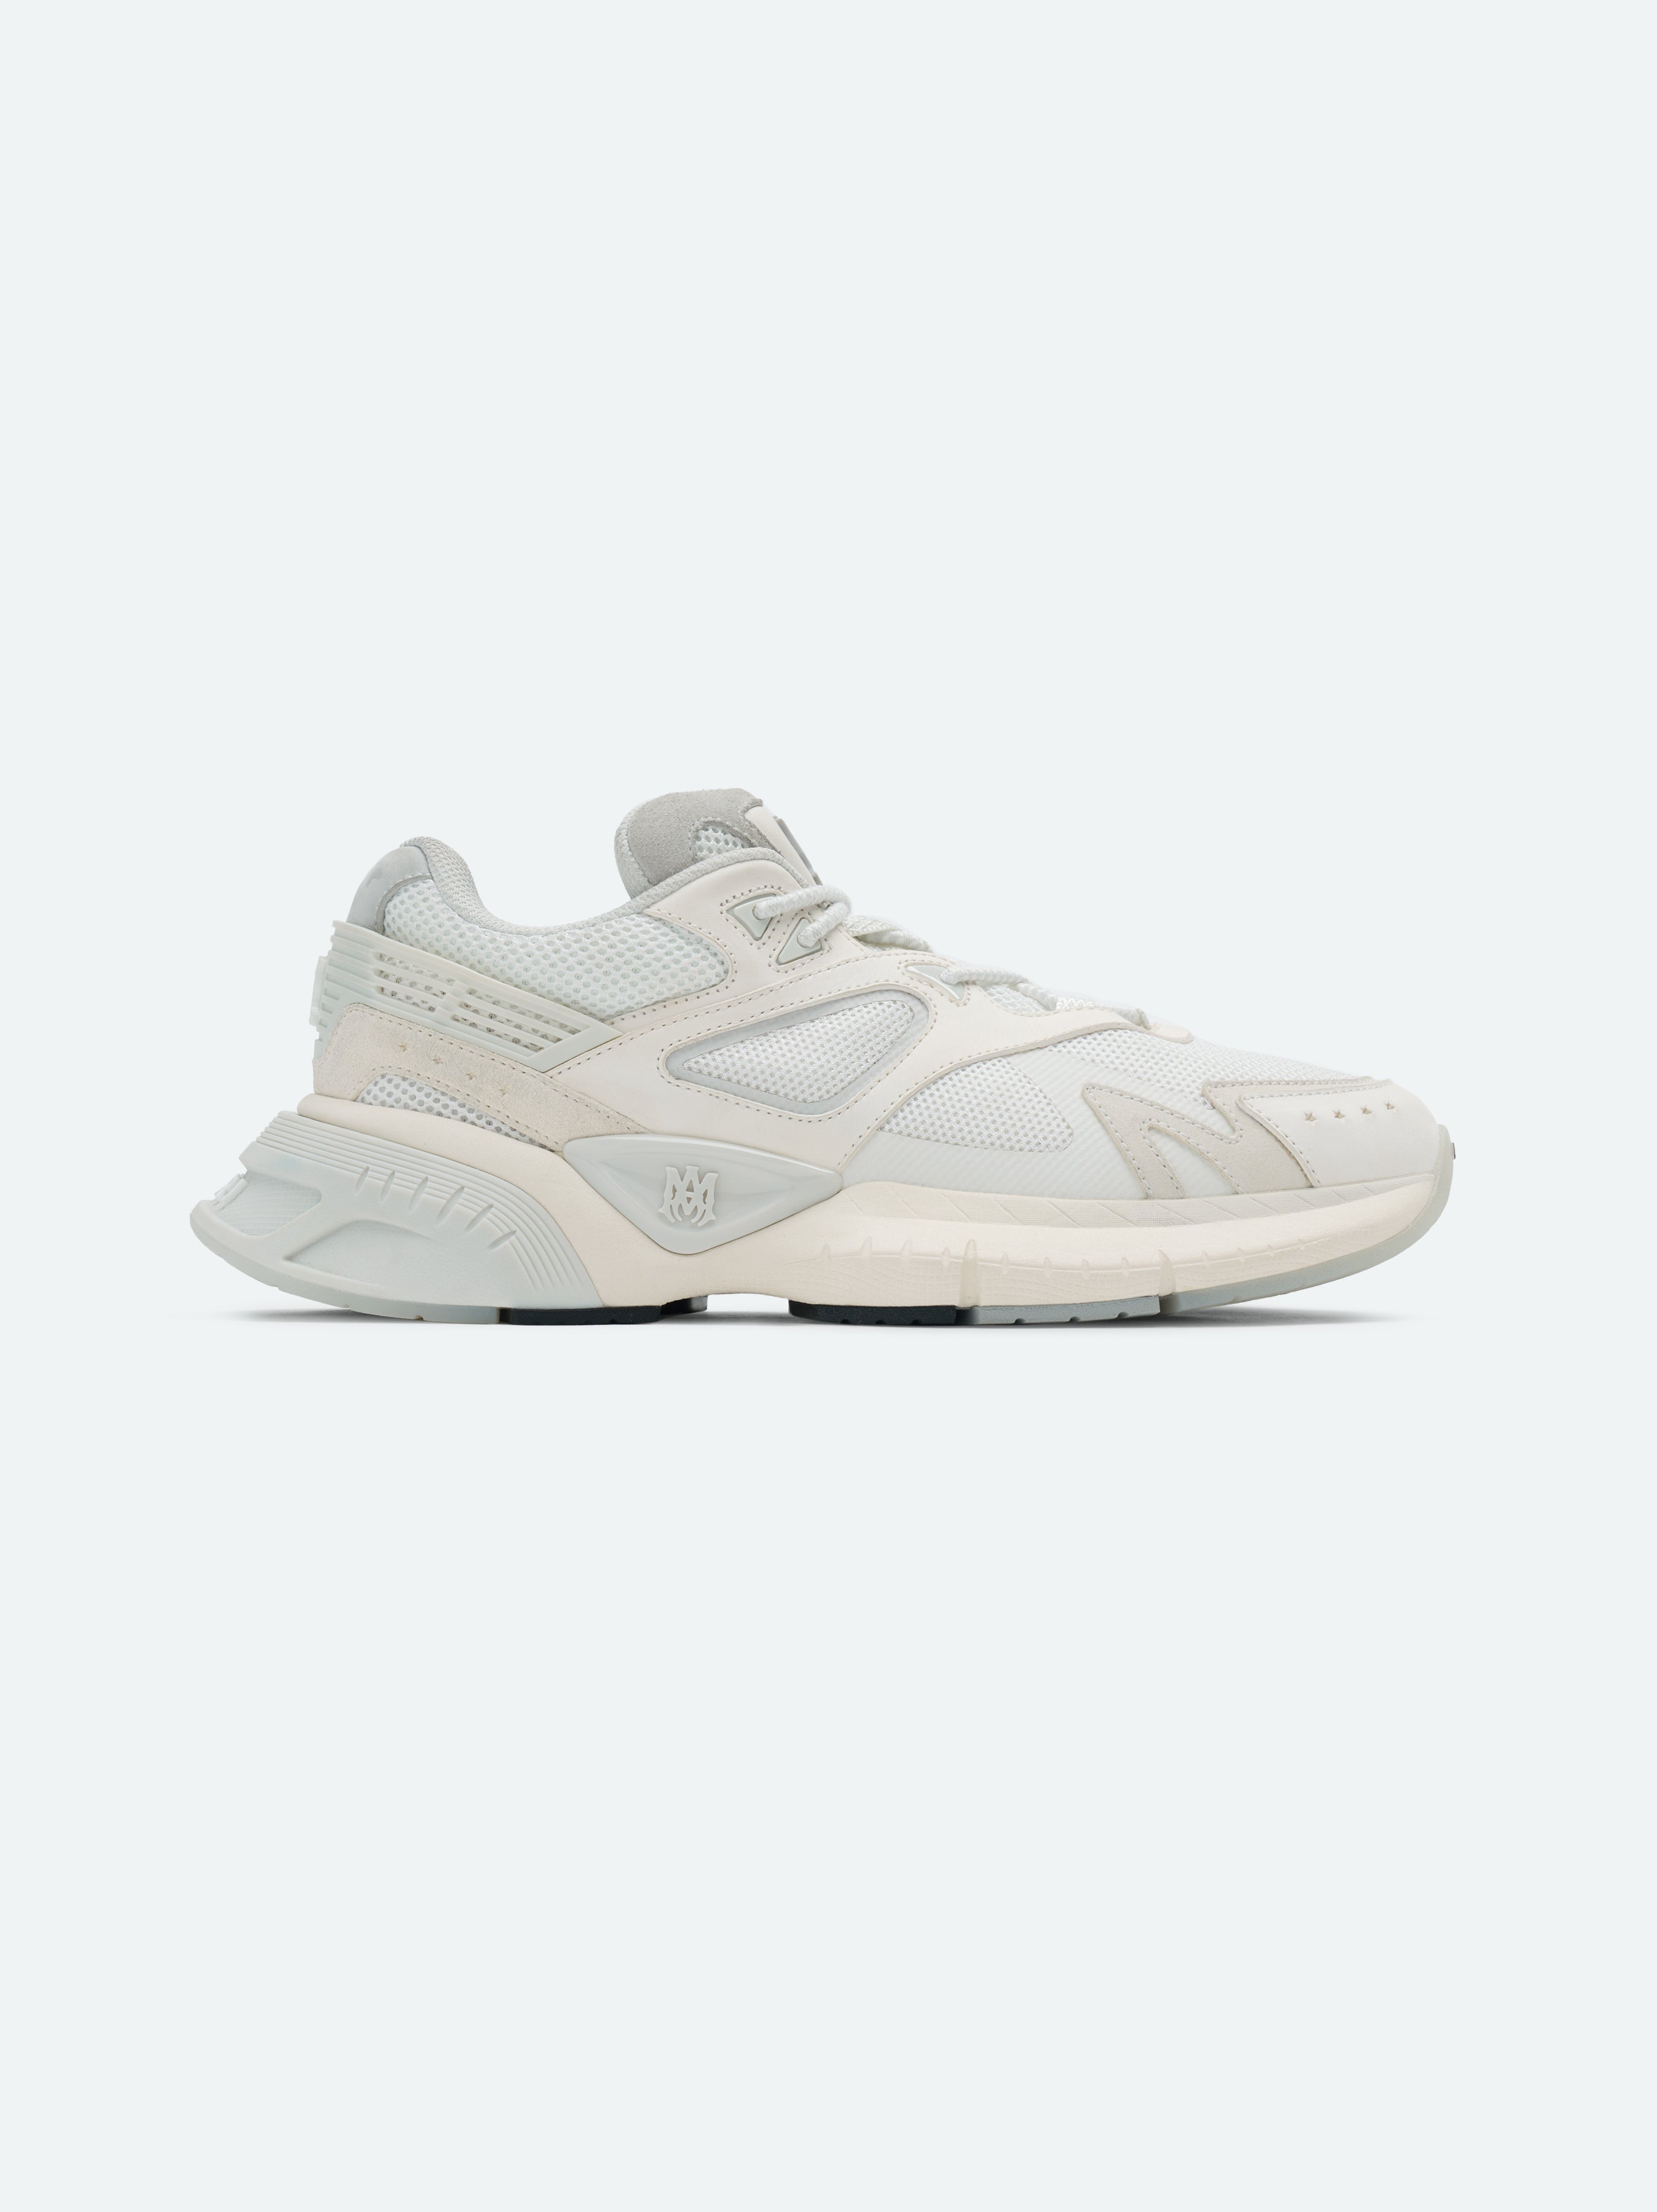 Product WOMEN - MA RUNNER - White featured image